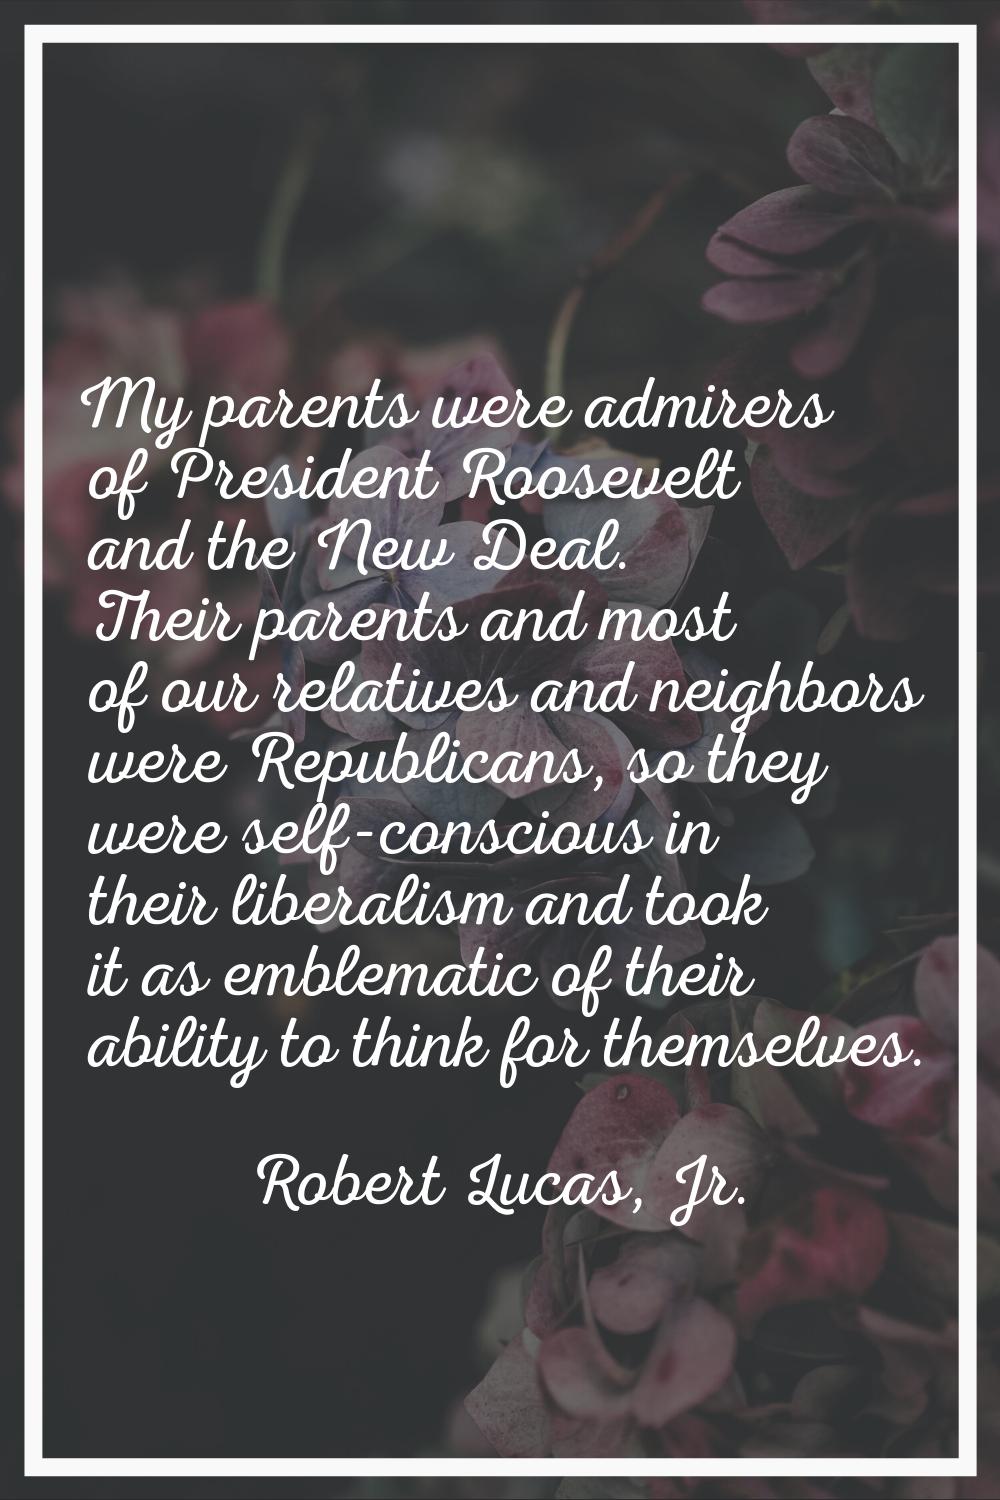 My parents were admirers of President Roosevelt and the New Deal. Their parents and most of our rel